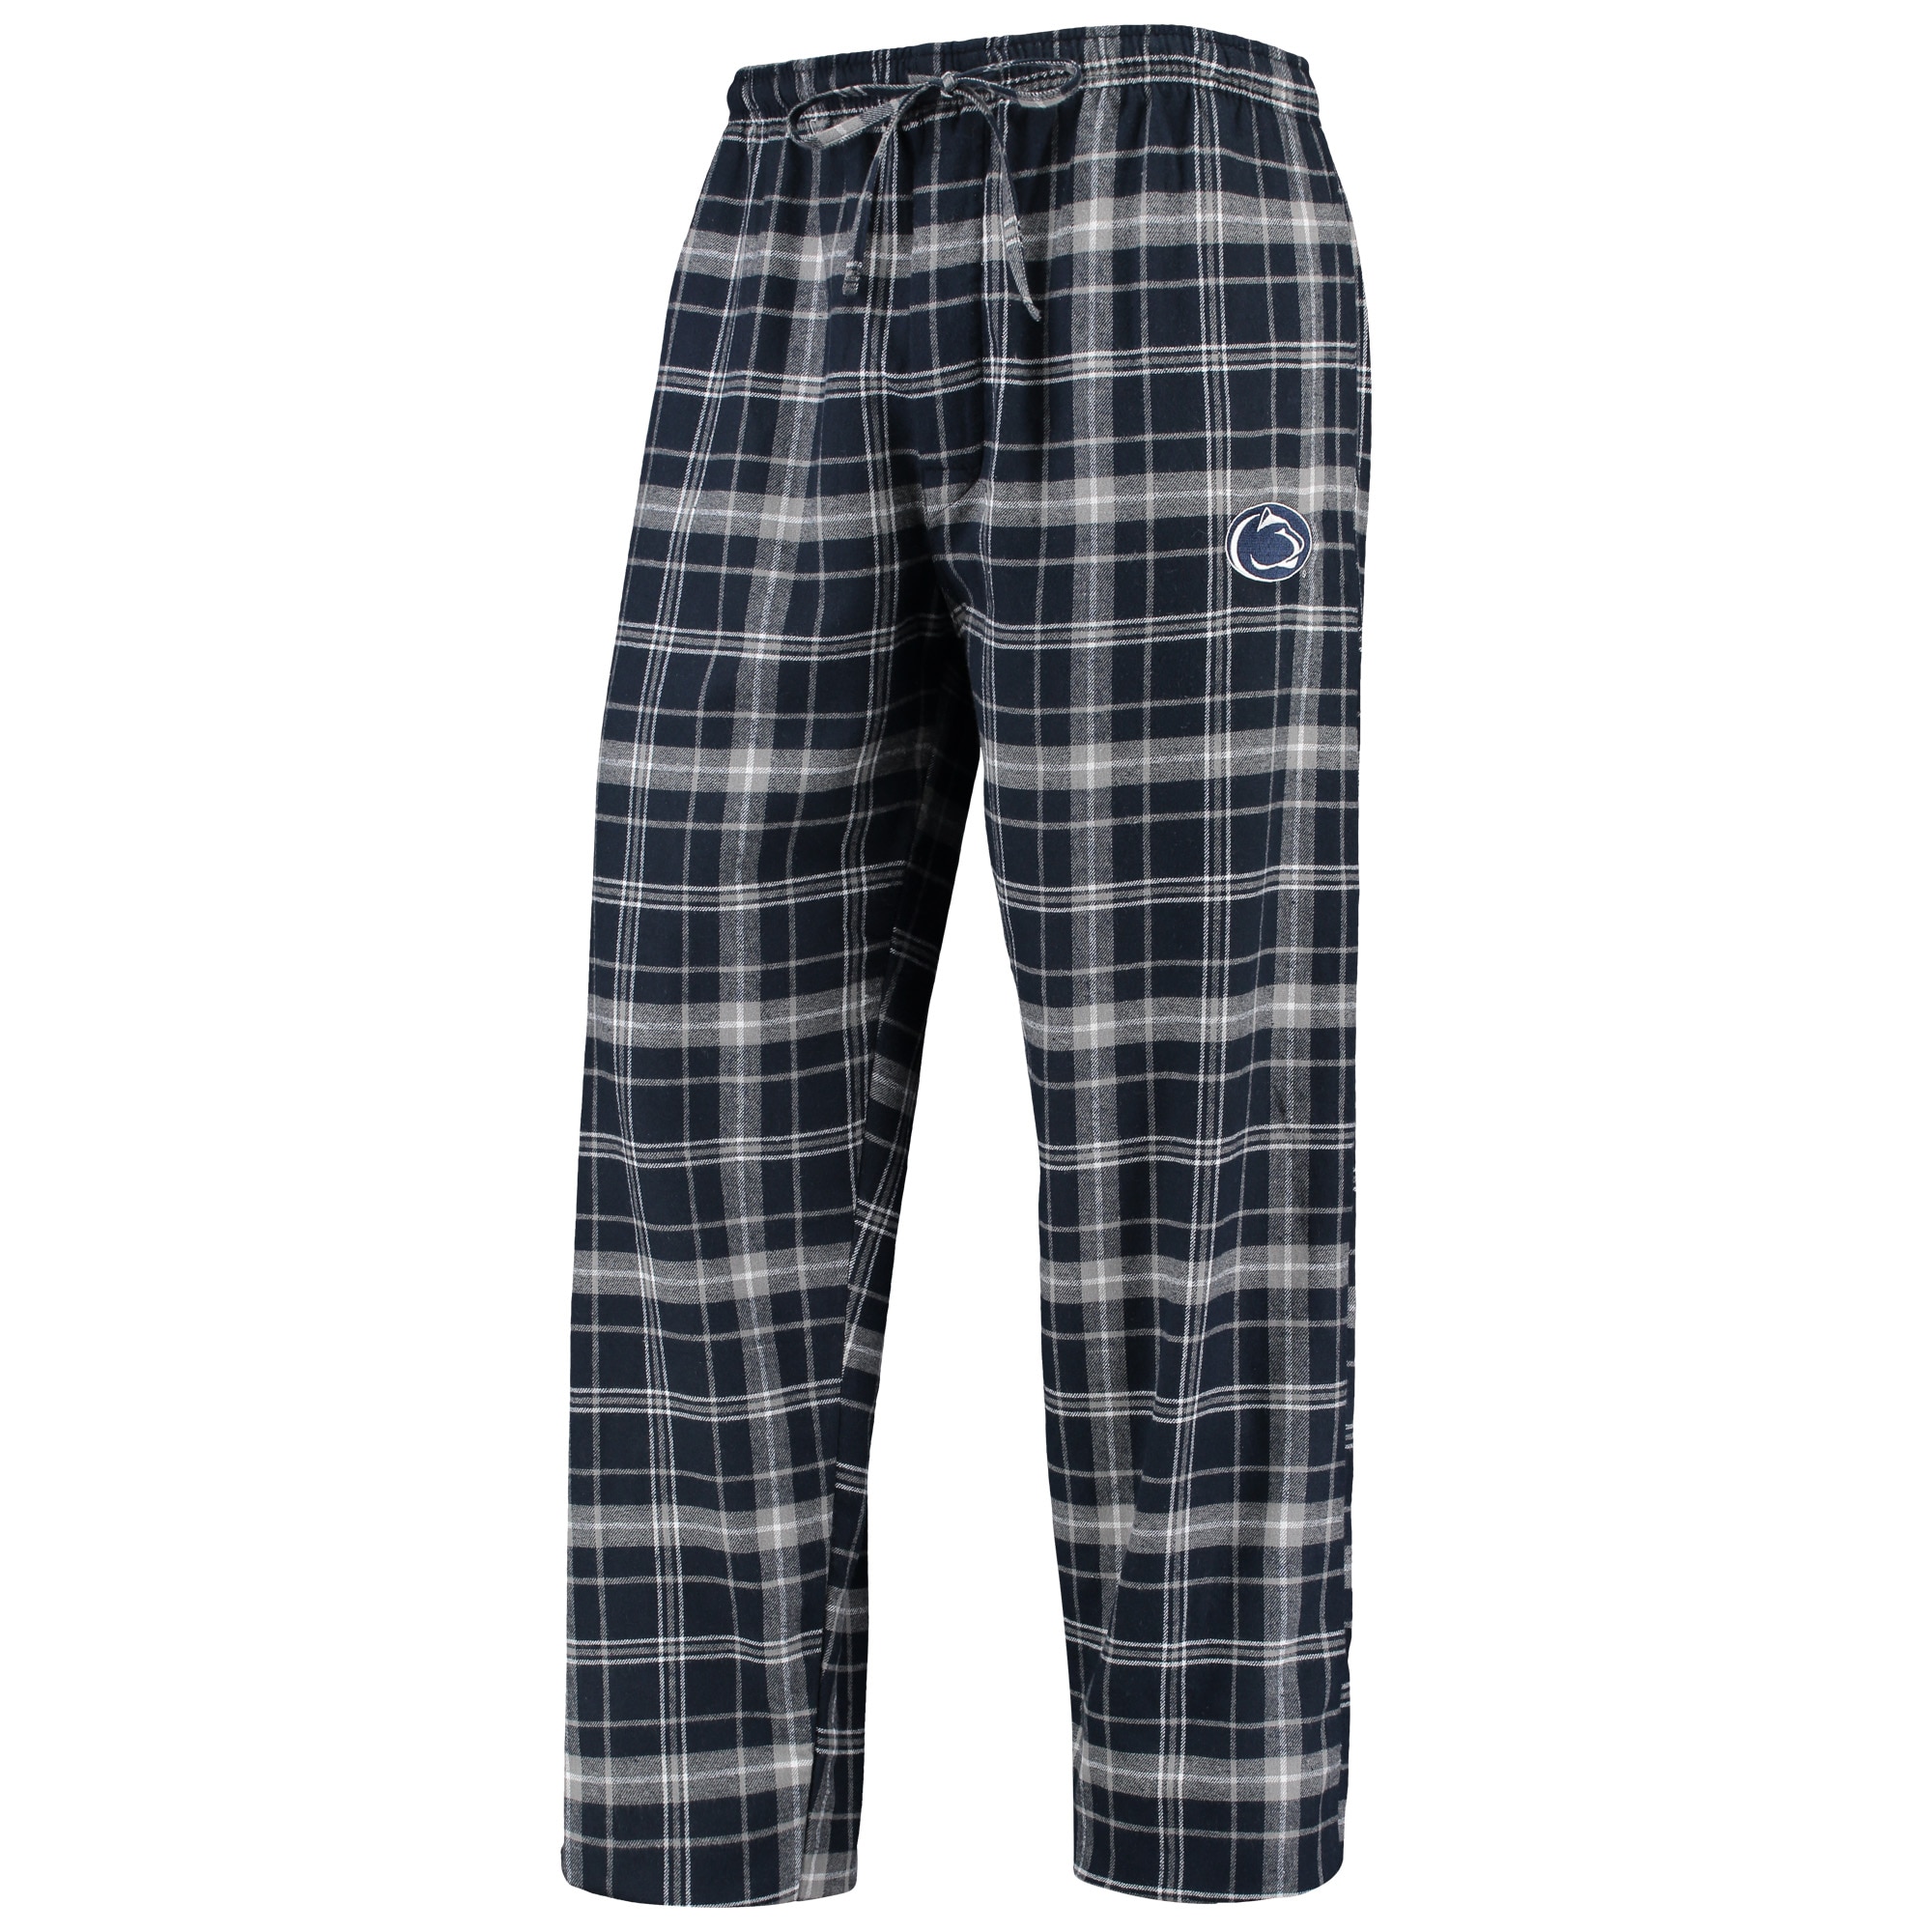 Men's Concepts Sport Navy/Gray Penn State Nittany Lions Ultimate Flannel Pants - image 1 of 2